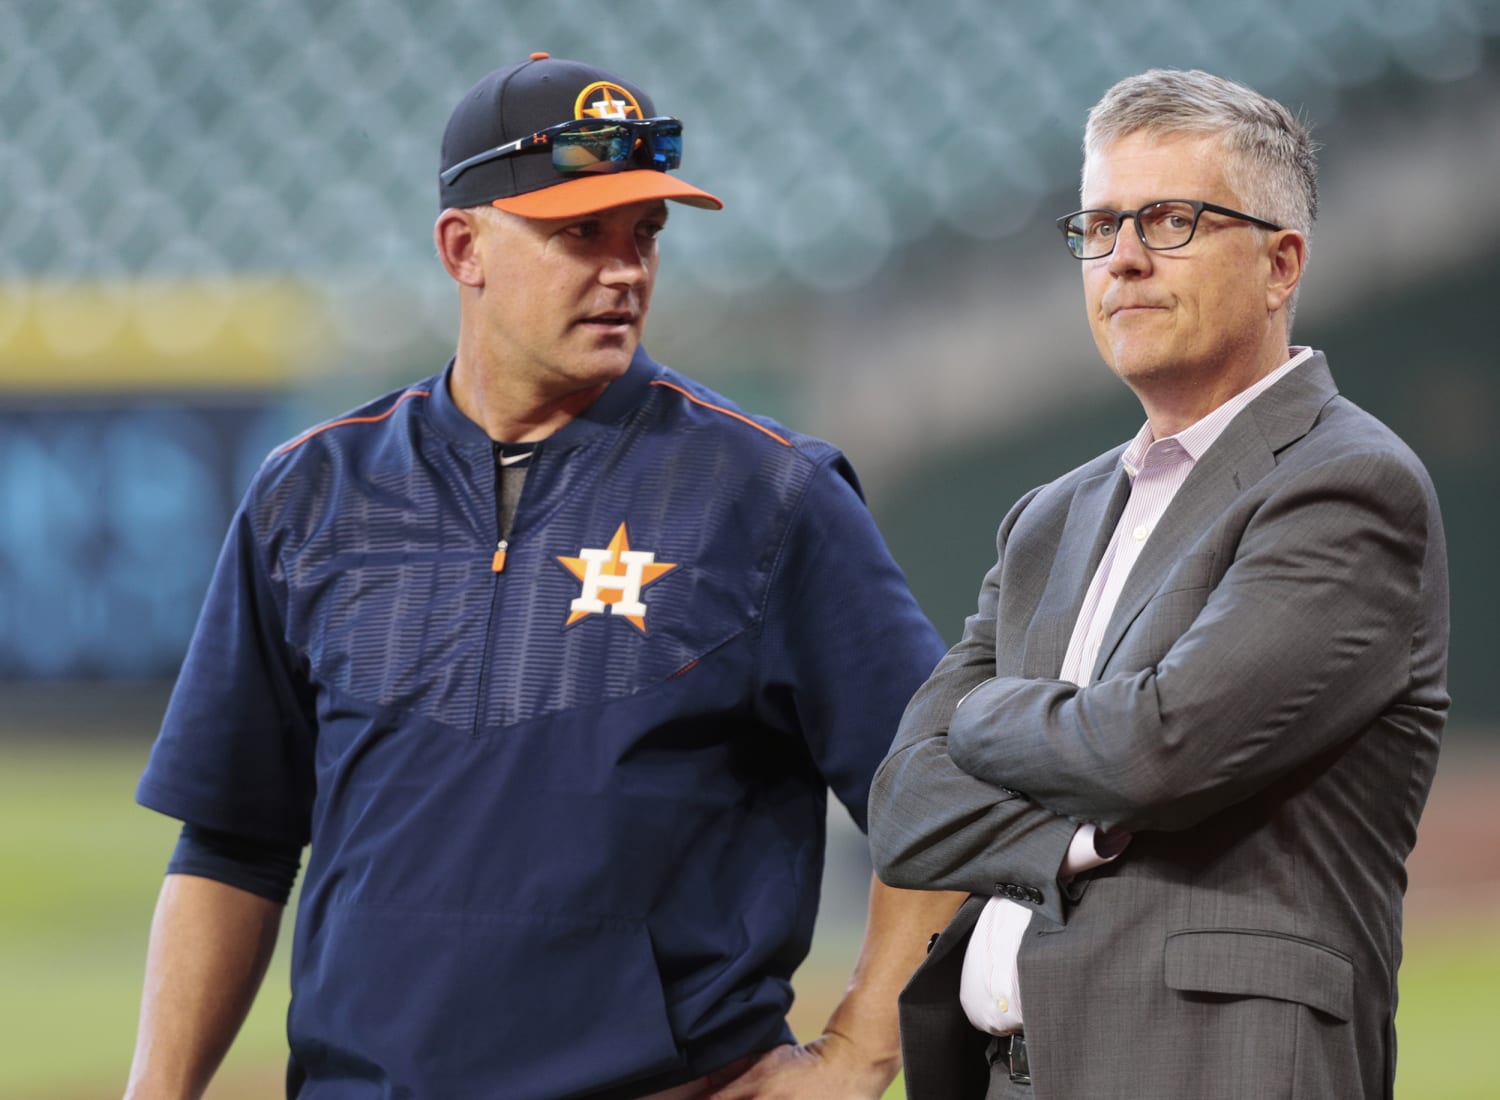 Closing the book on 2022 MLB season, a confession: I dig the Astros